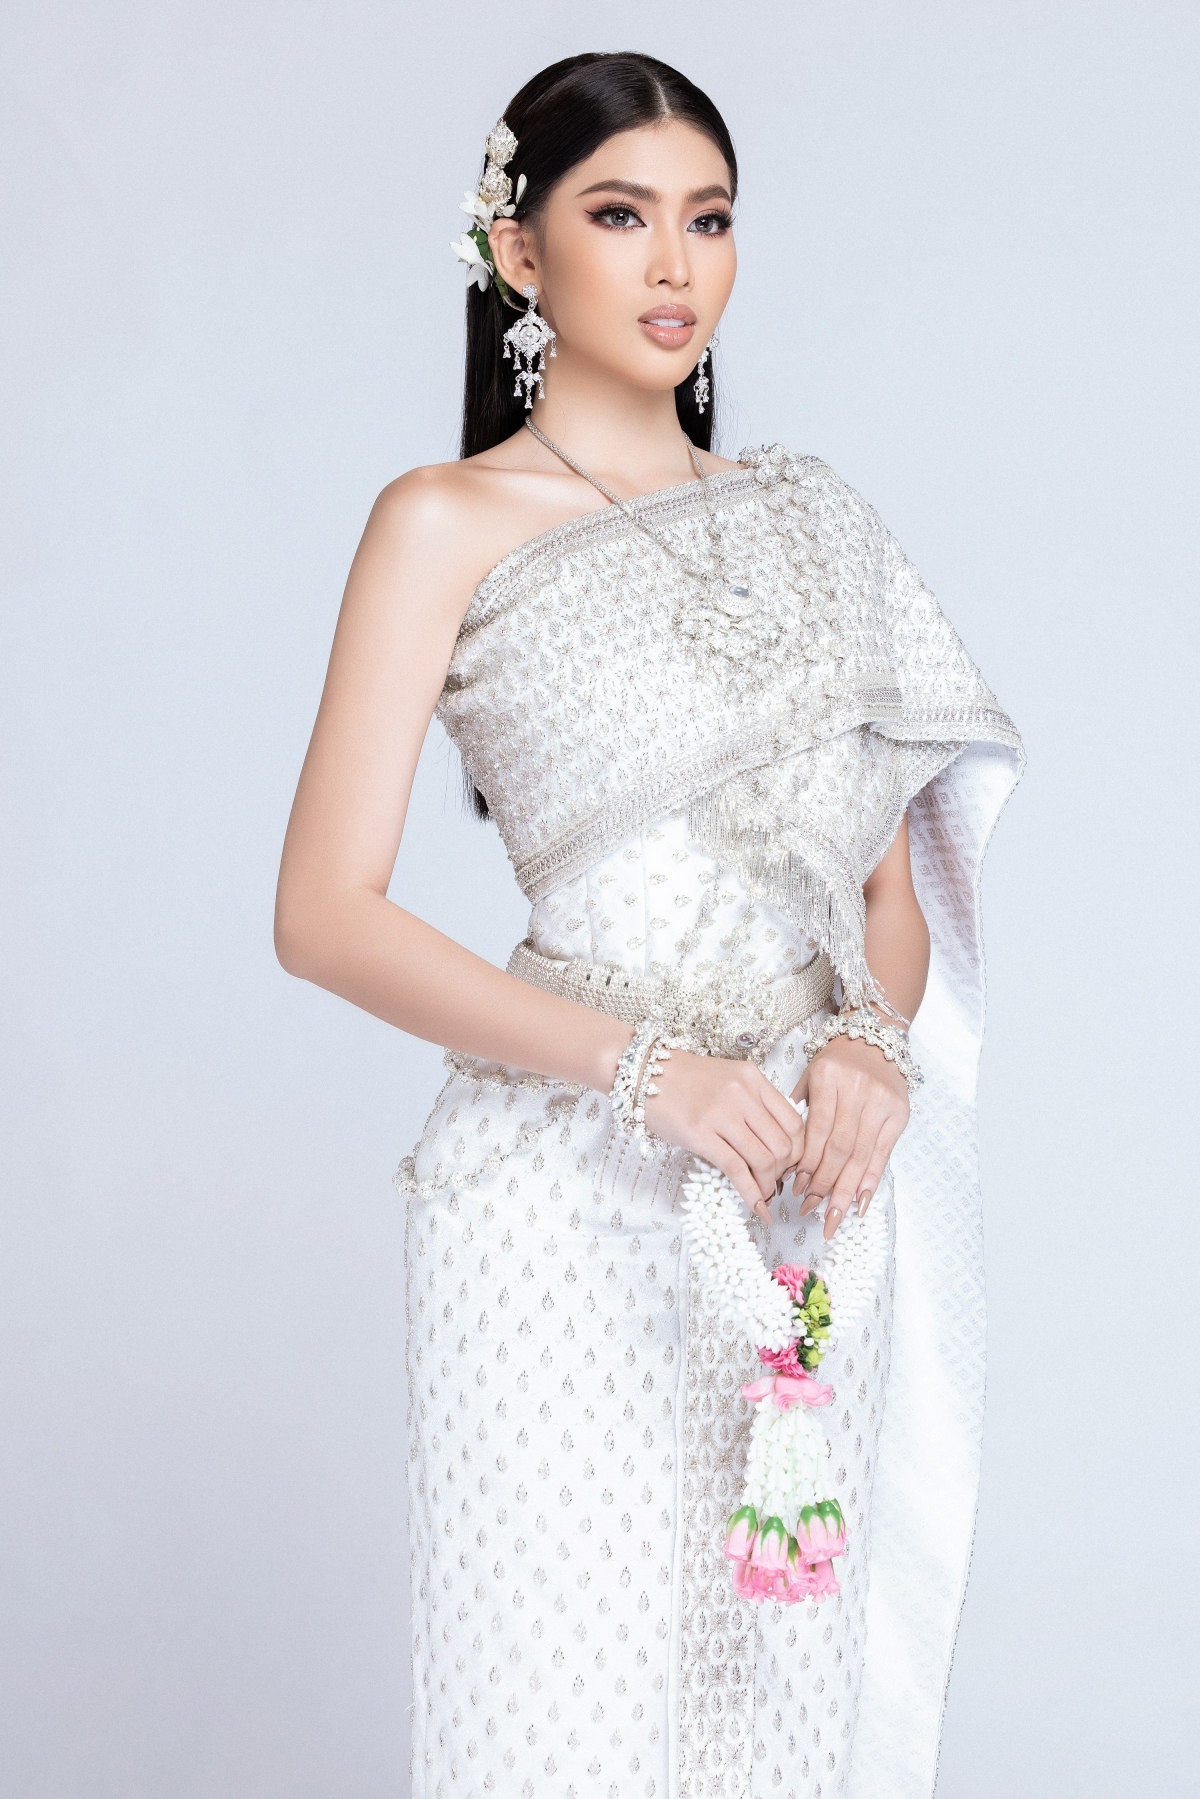 ngoc thao wows in thai costume picture 6